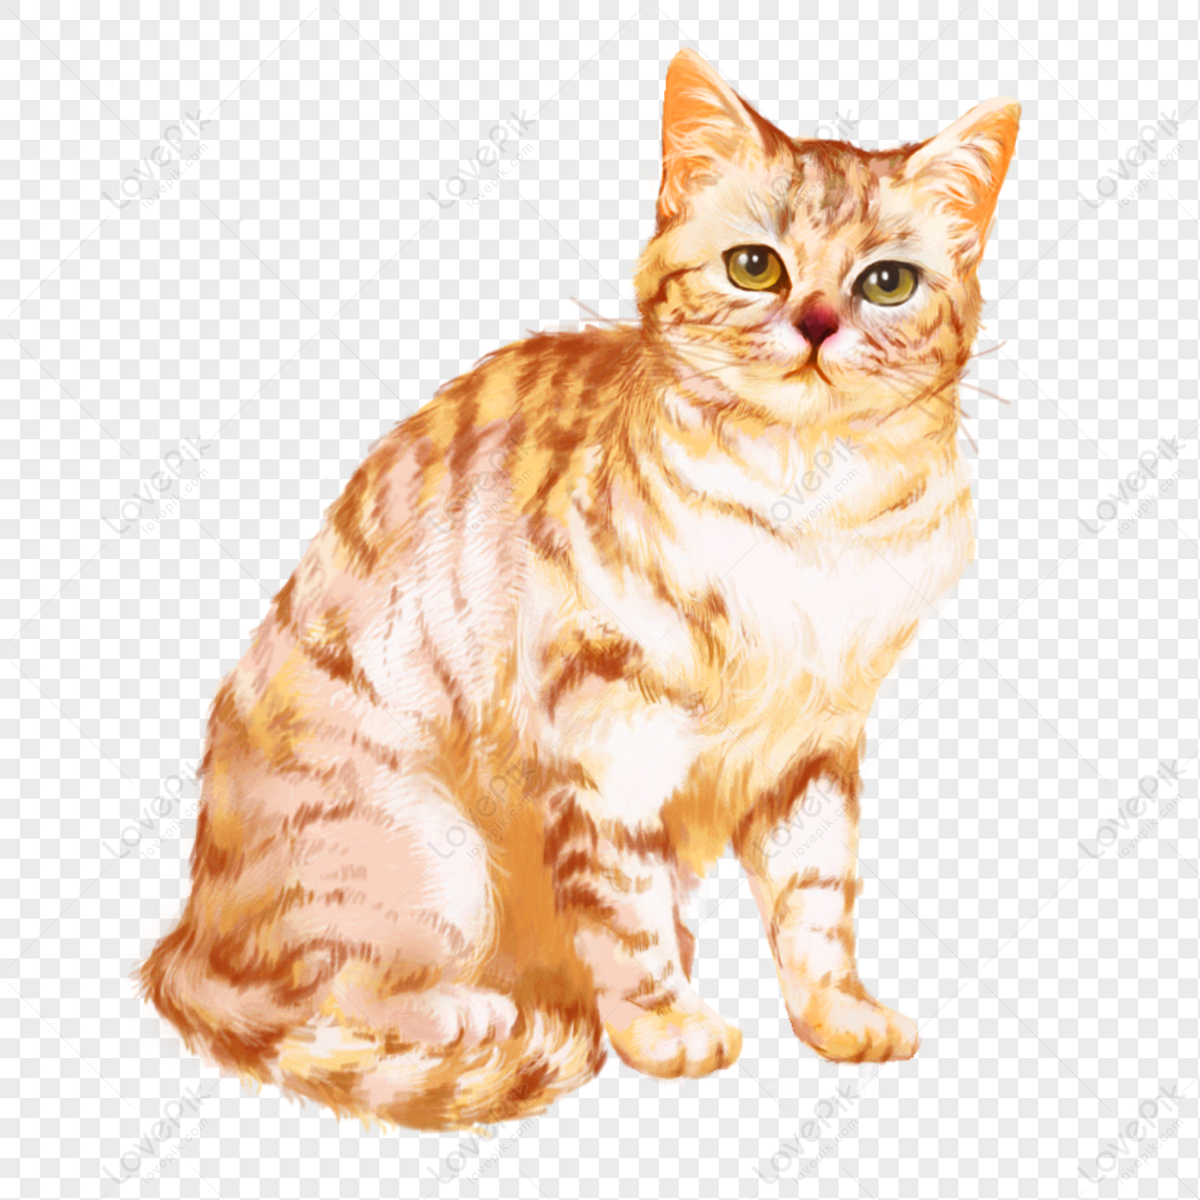 Yellow Cat PNG Images With Transparent Background | Free Download ...